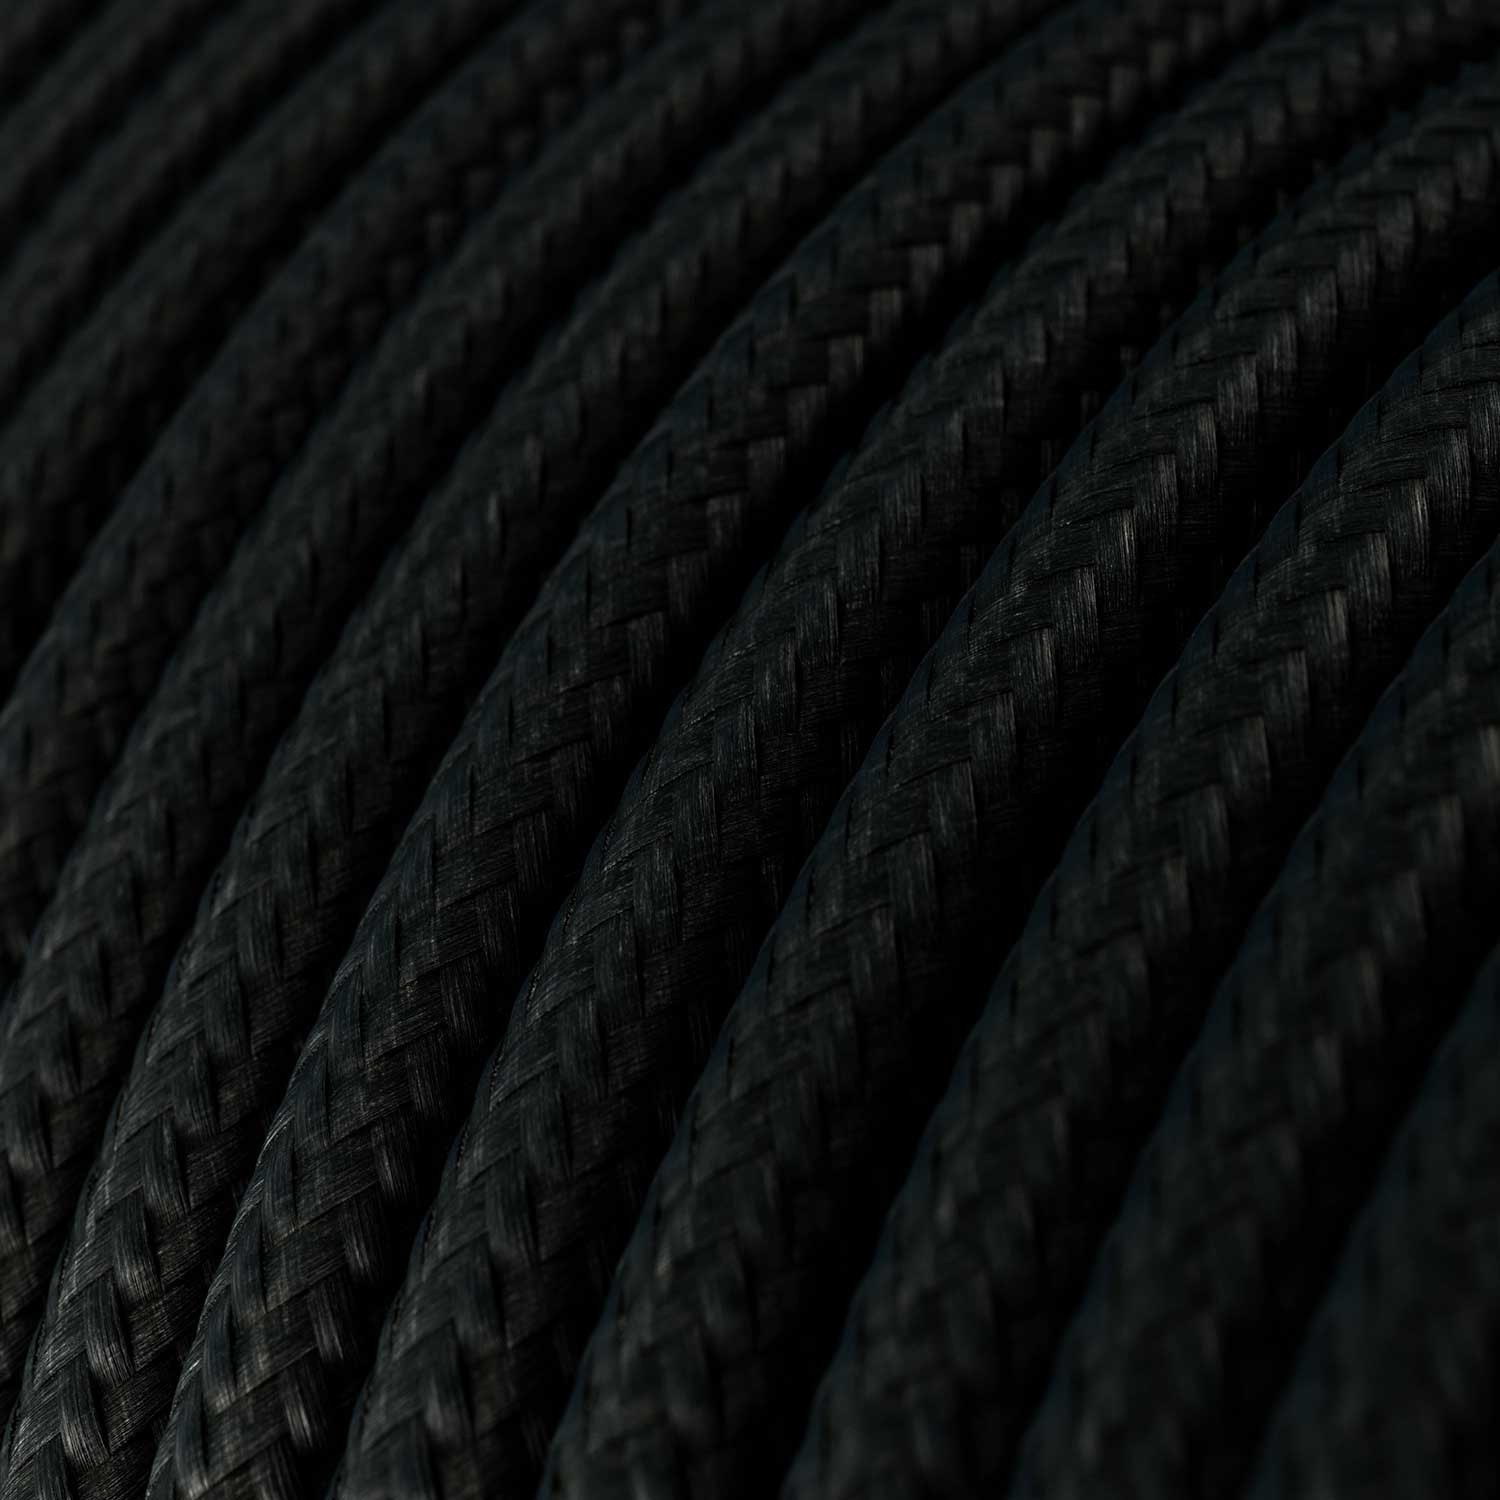 Glossy Charcoal Black Textile Cable - The Original Creative-Cables - RM04 round 2x0.75mm / 3x0.75mm